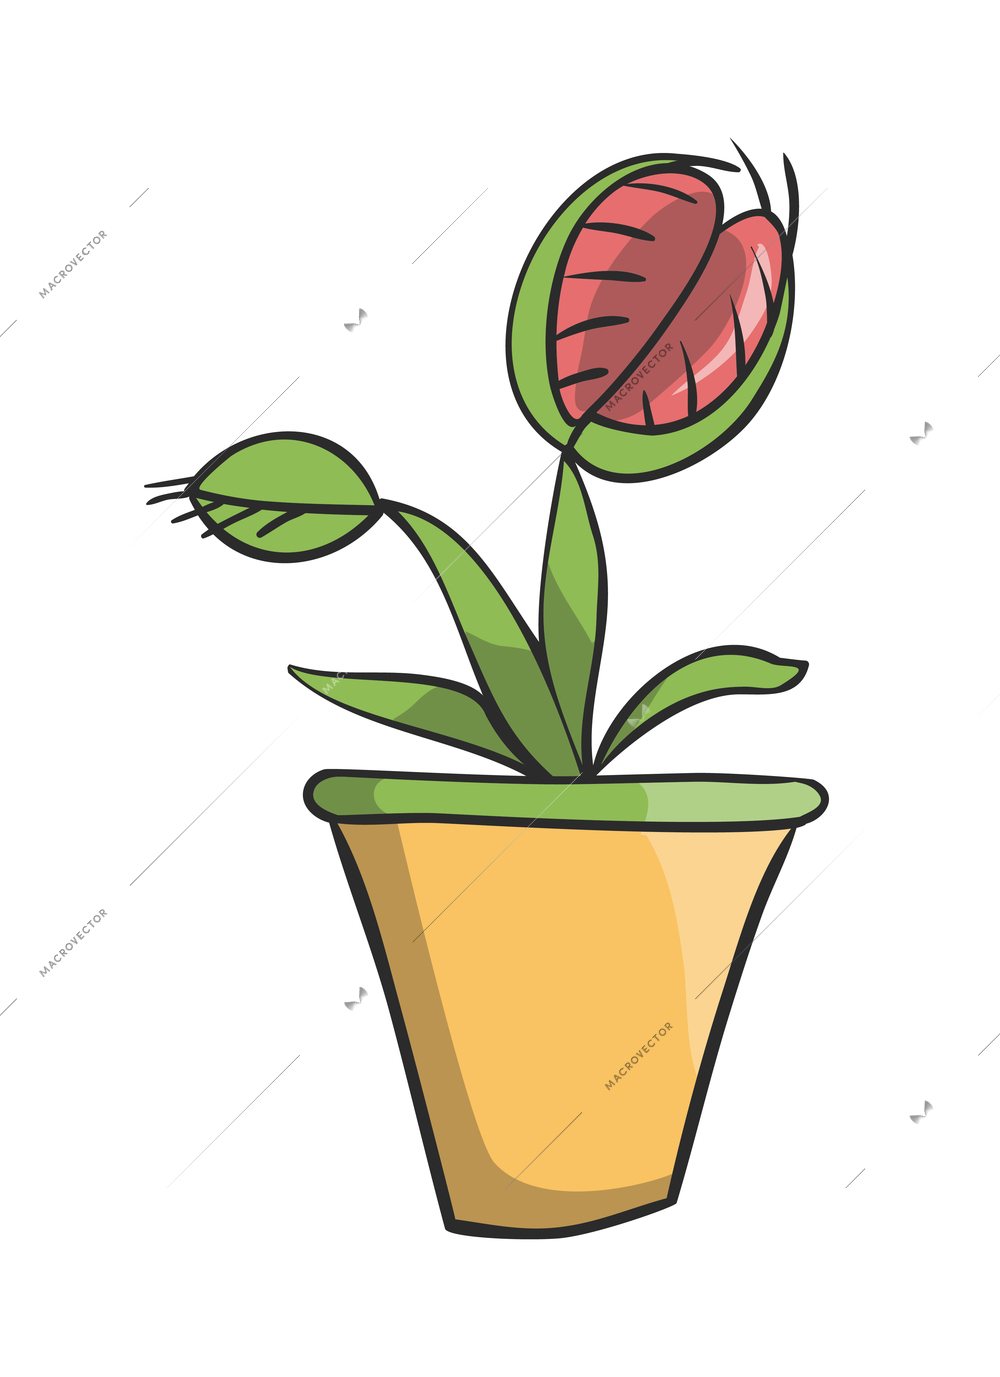 Gardener composition with isolated cartoon style icon of gardening tool on blank background vector illustration